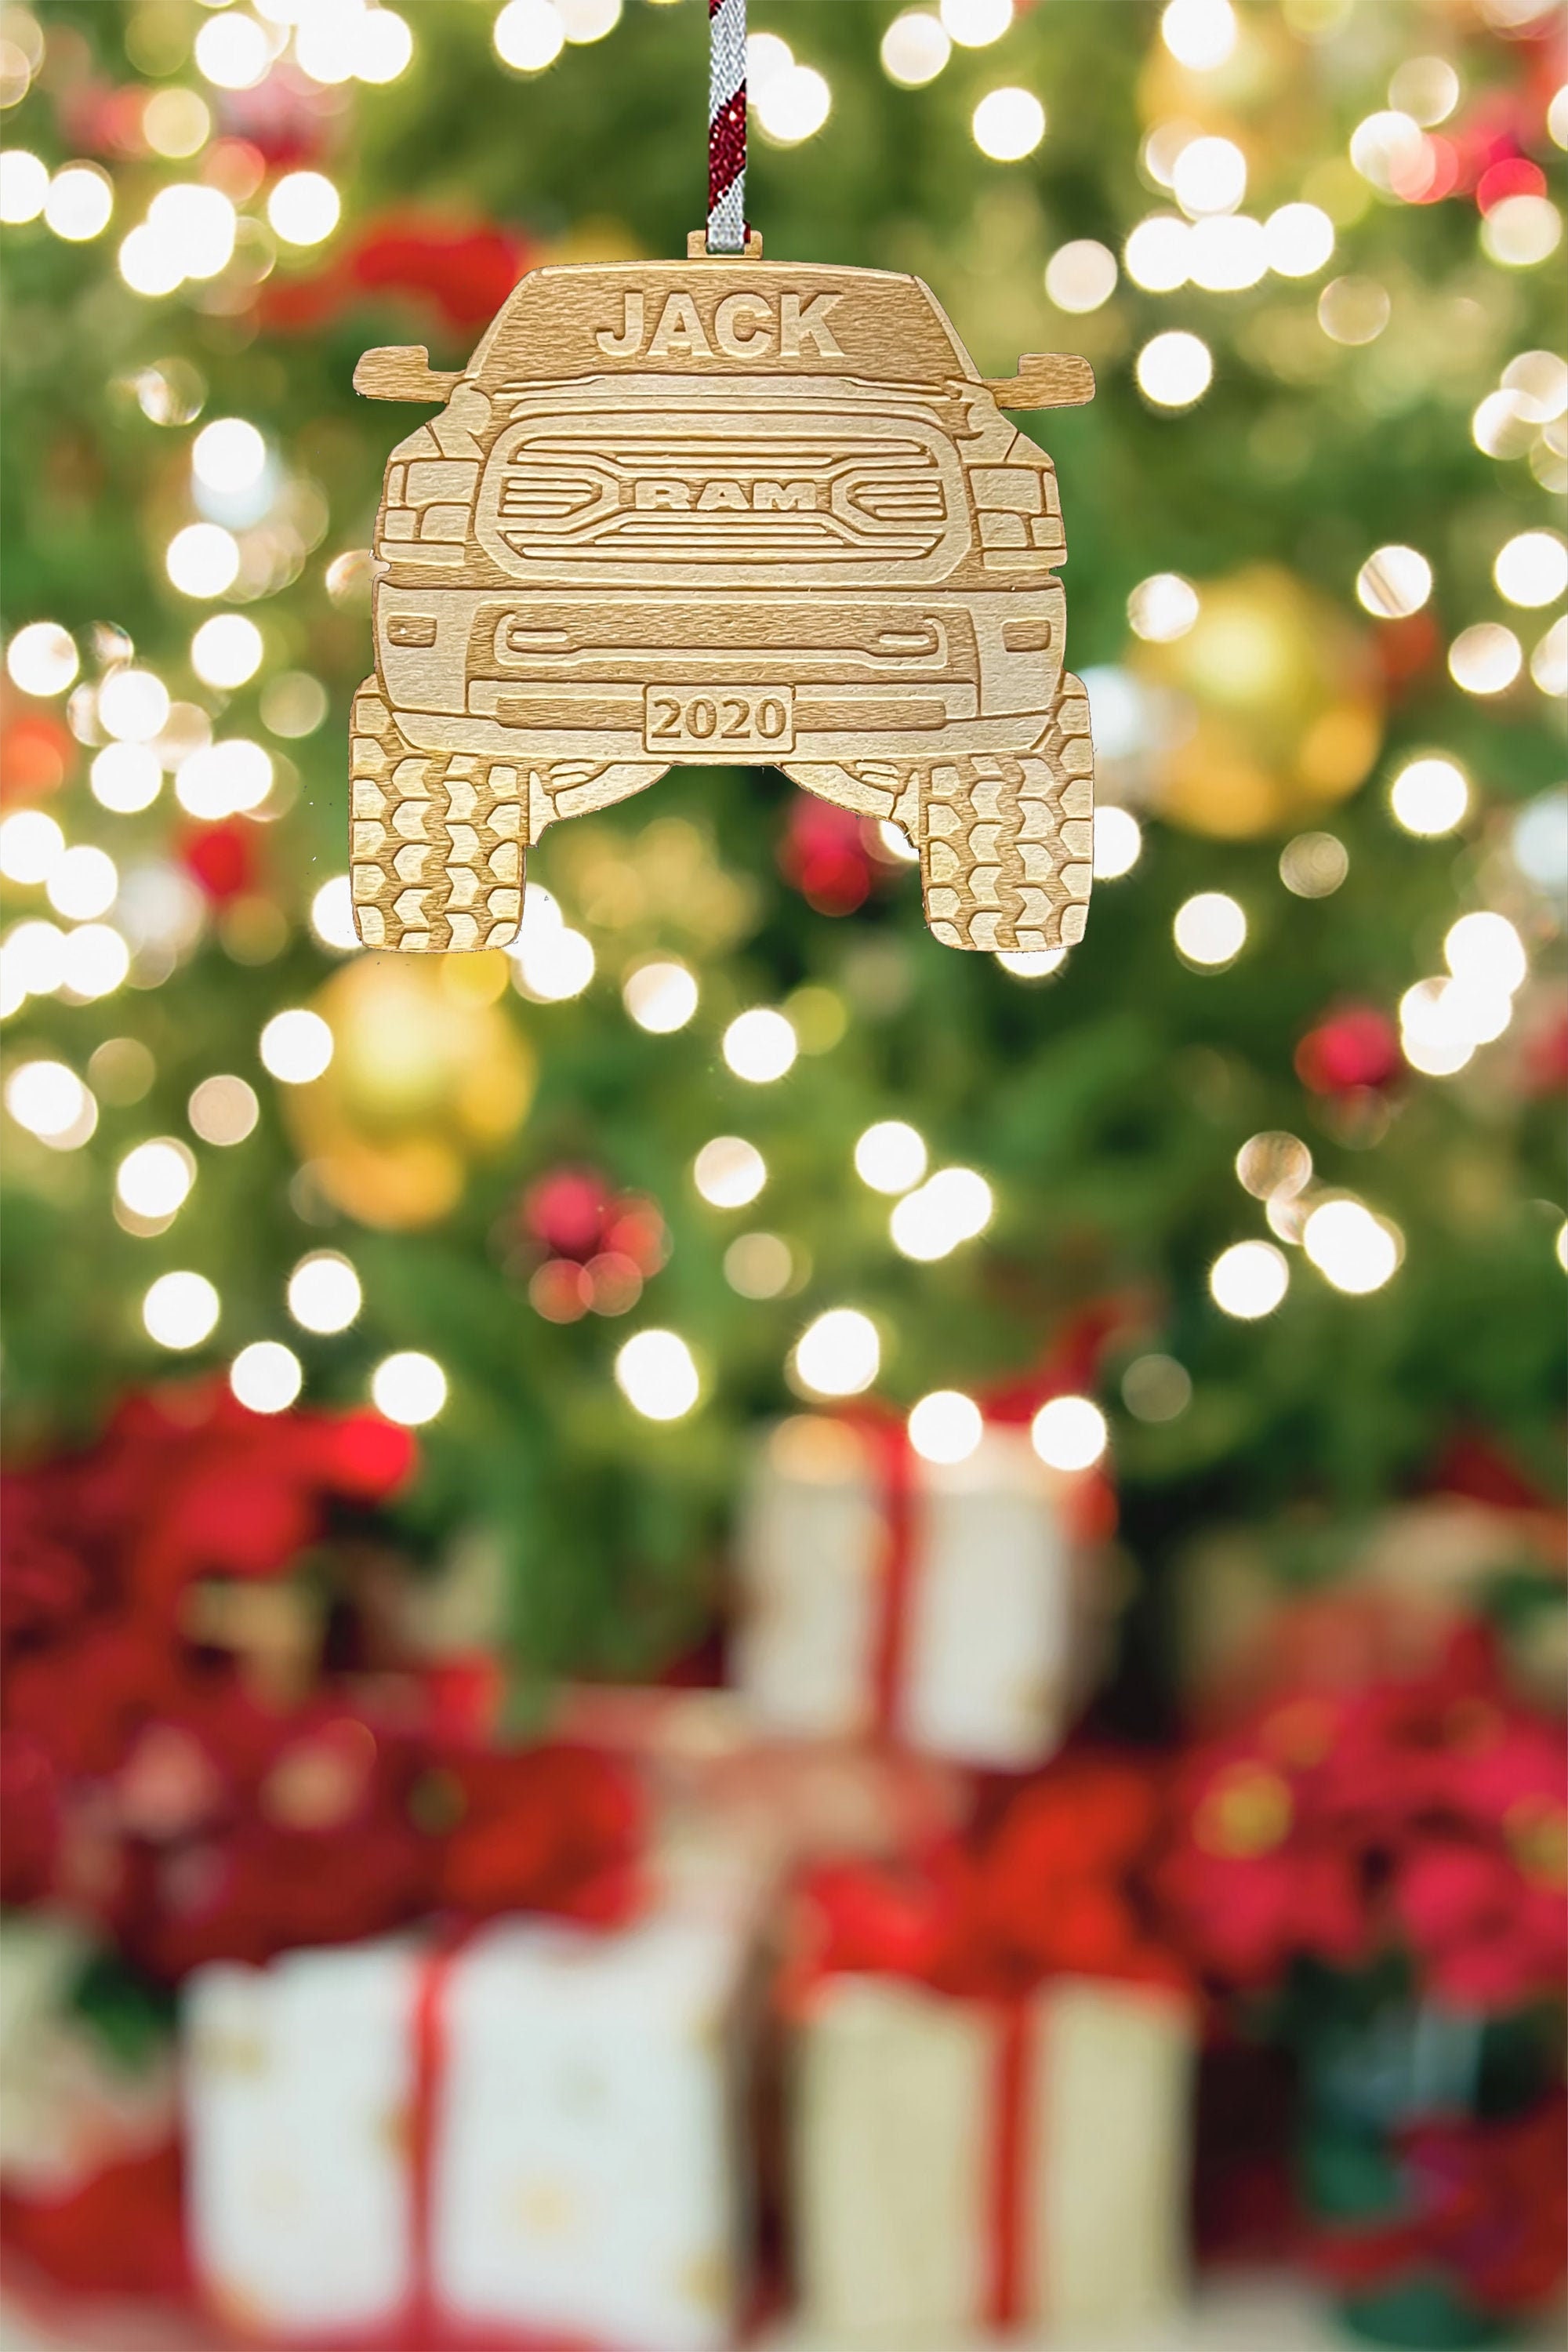 Dodge Ram , Truck Ornament- Christmas Tree Decoration - Baubles- Gift